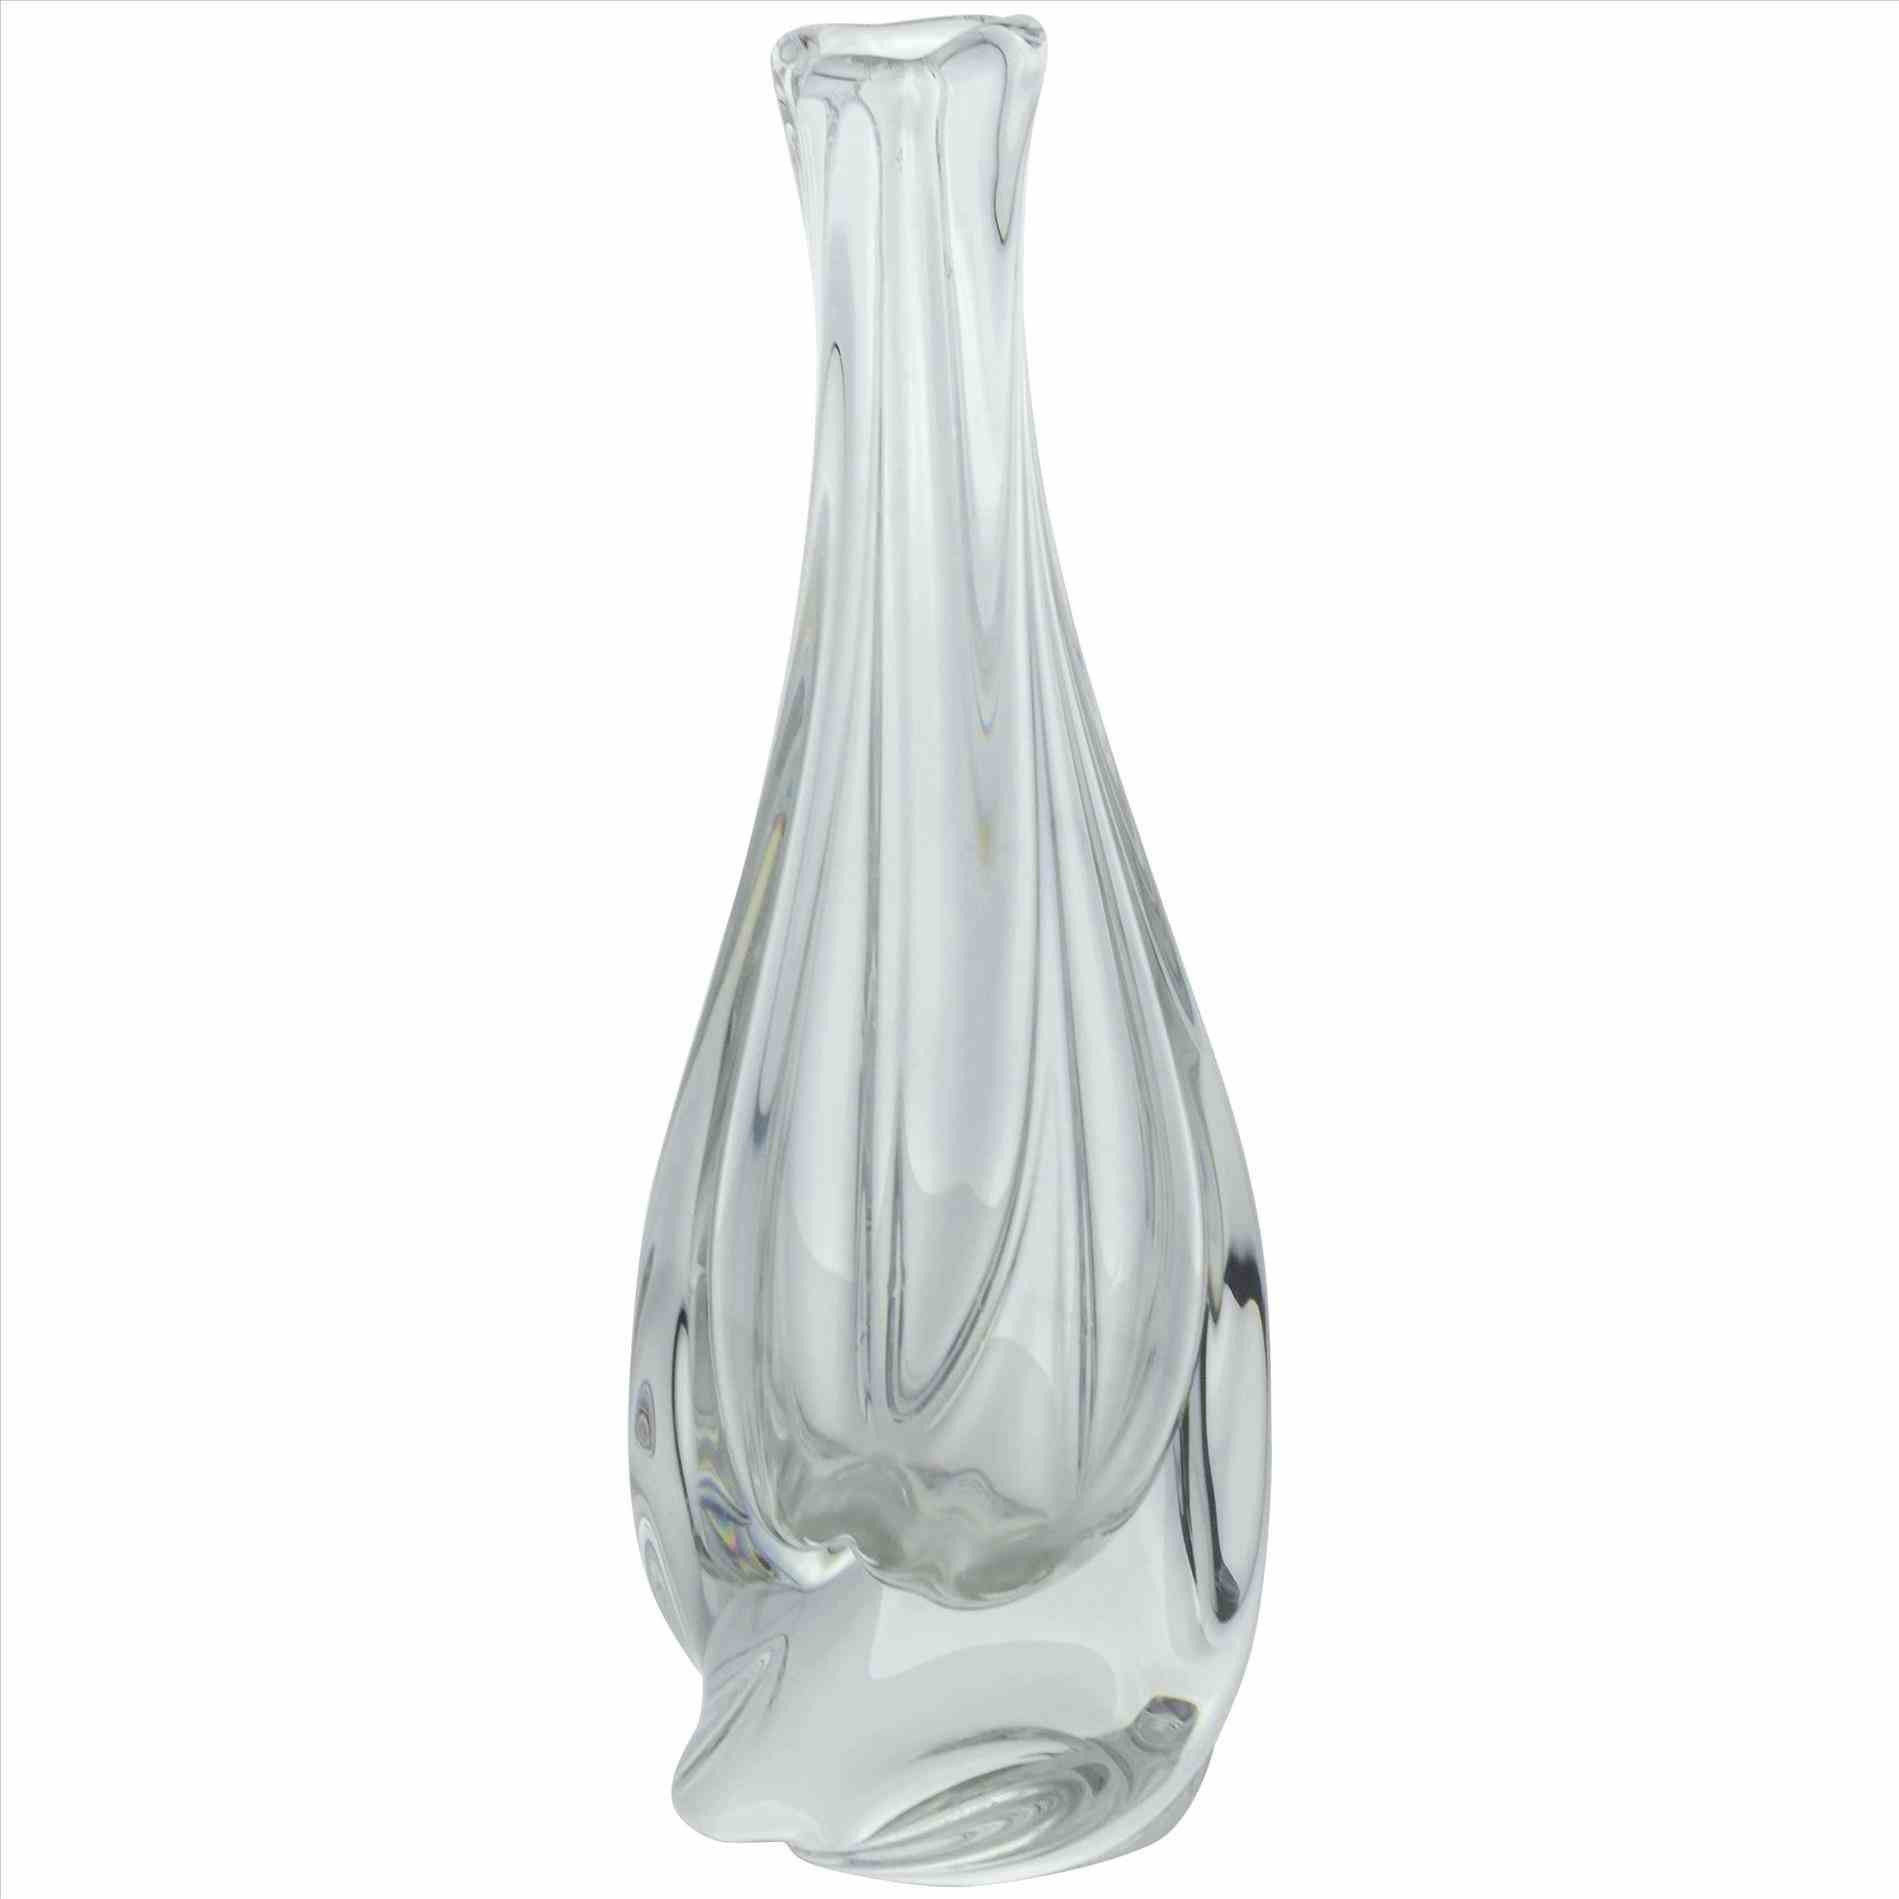 20 Stylish Plastic Bud Vases wholesale 2024 free download plastic bud vases wholesale of silver vases wholesale pandoraocharms us intended for silver vases wholesale for u flowers and supplies